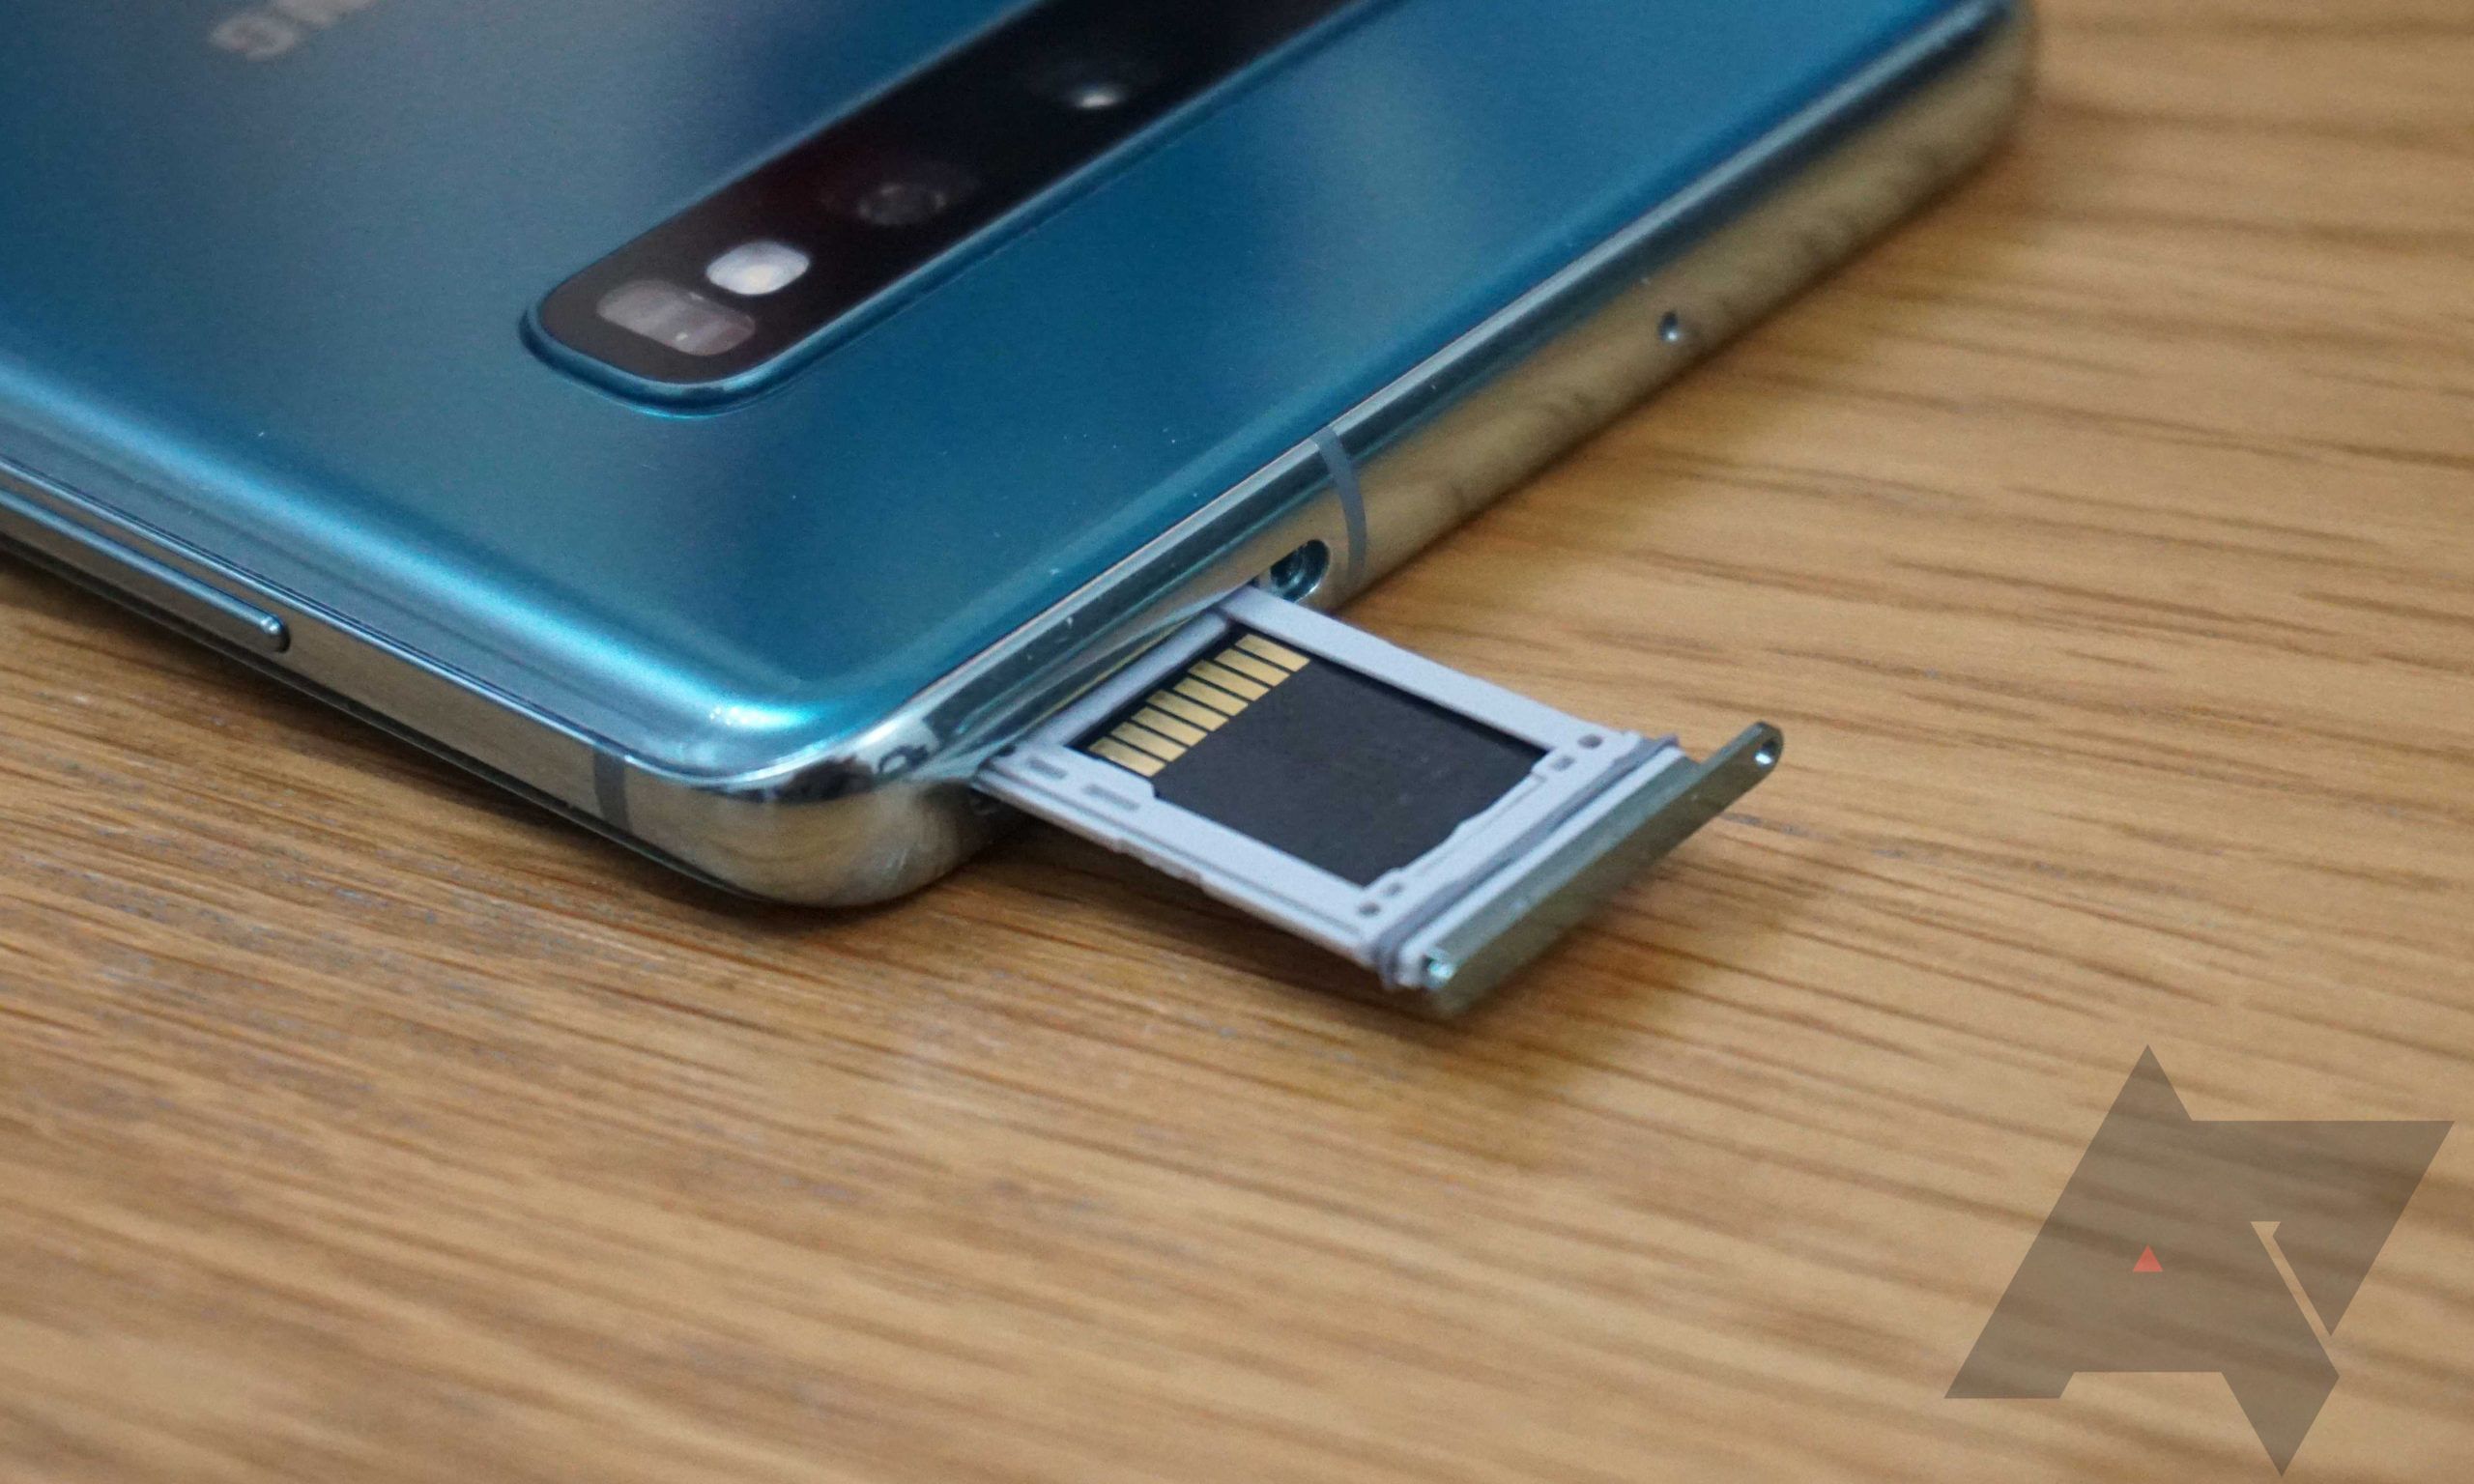 Move your photos from your Samsung Galaxy phone or tablet to an SD card